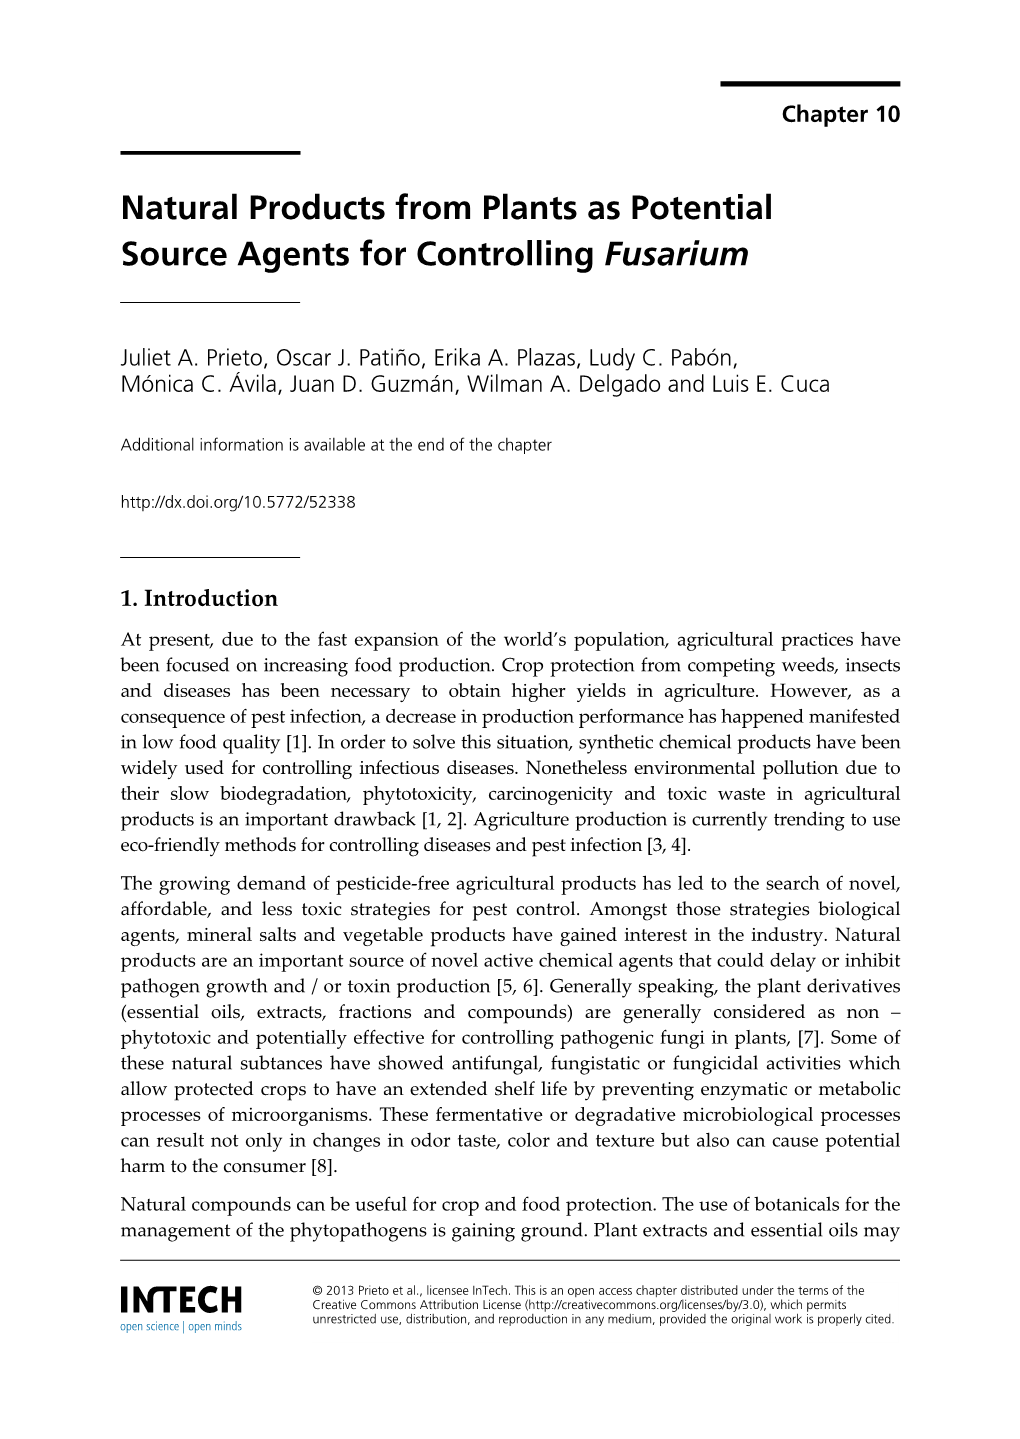 Natural Products from Plants As Potential Source Agents for Controlling Fusarium